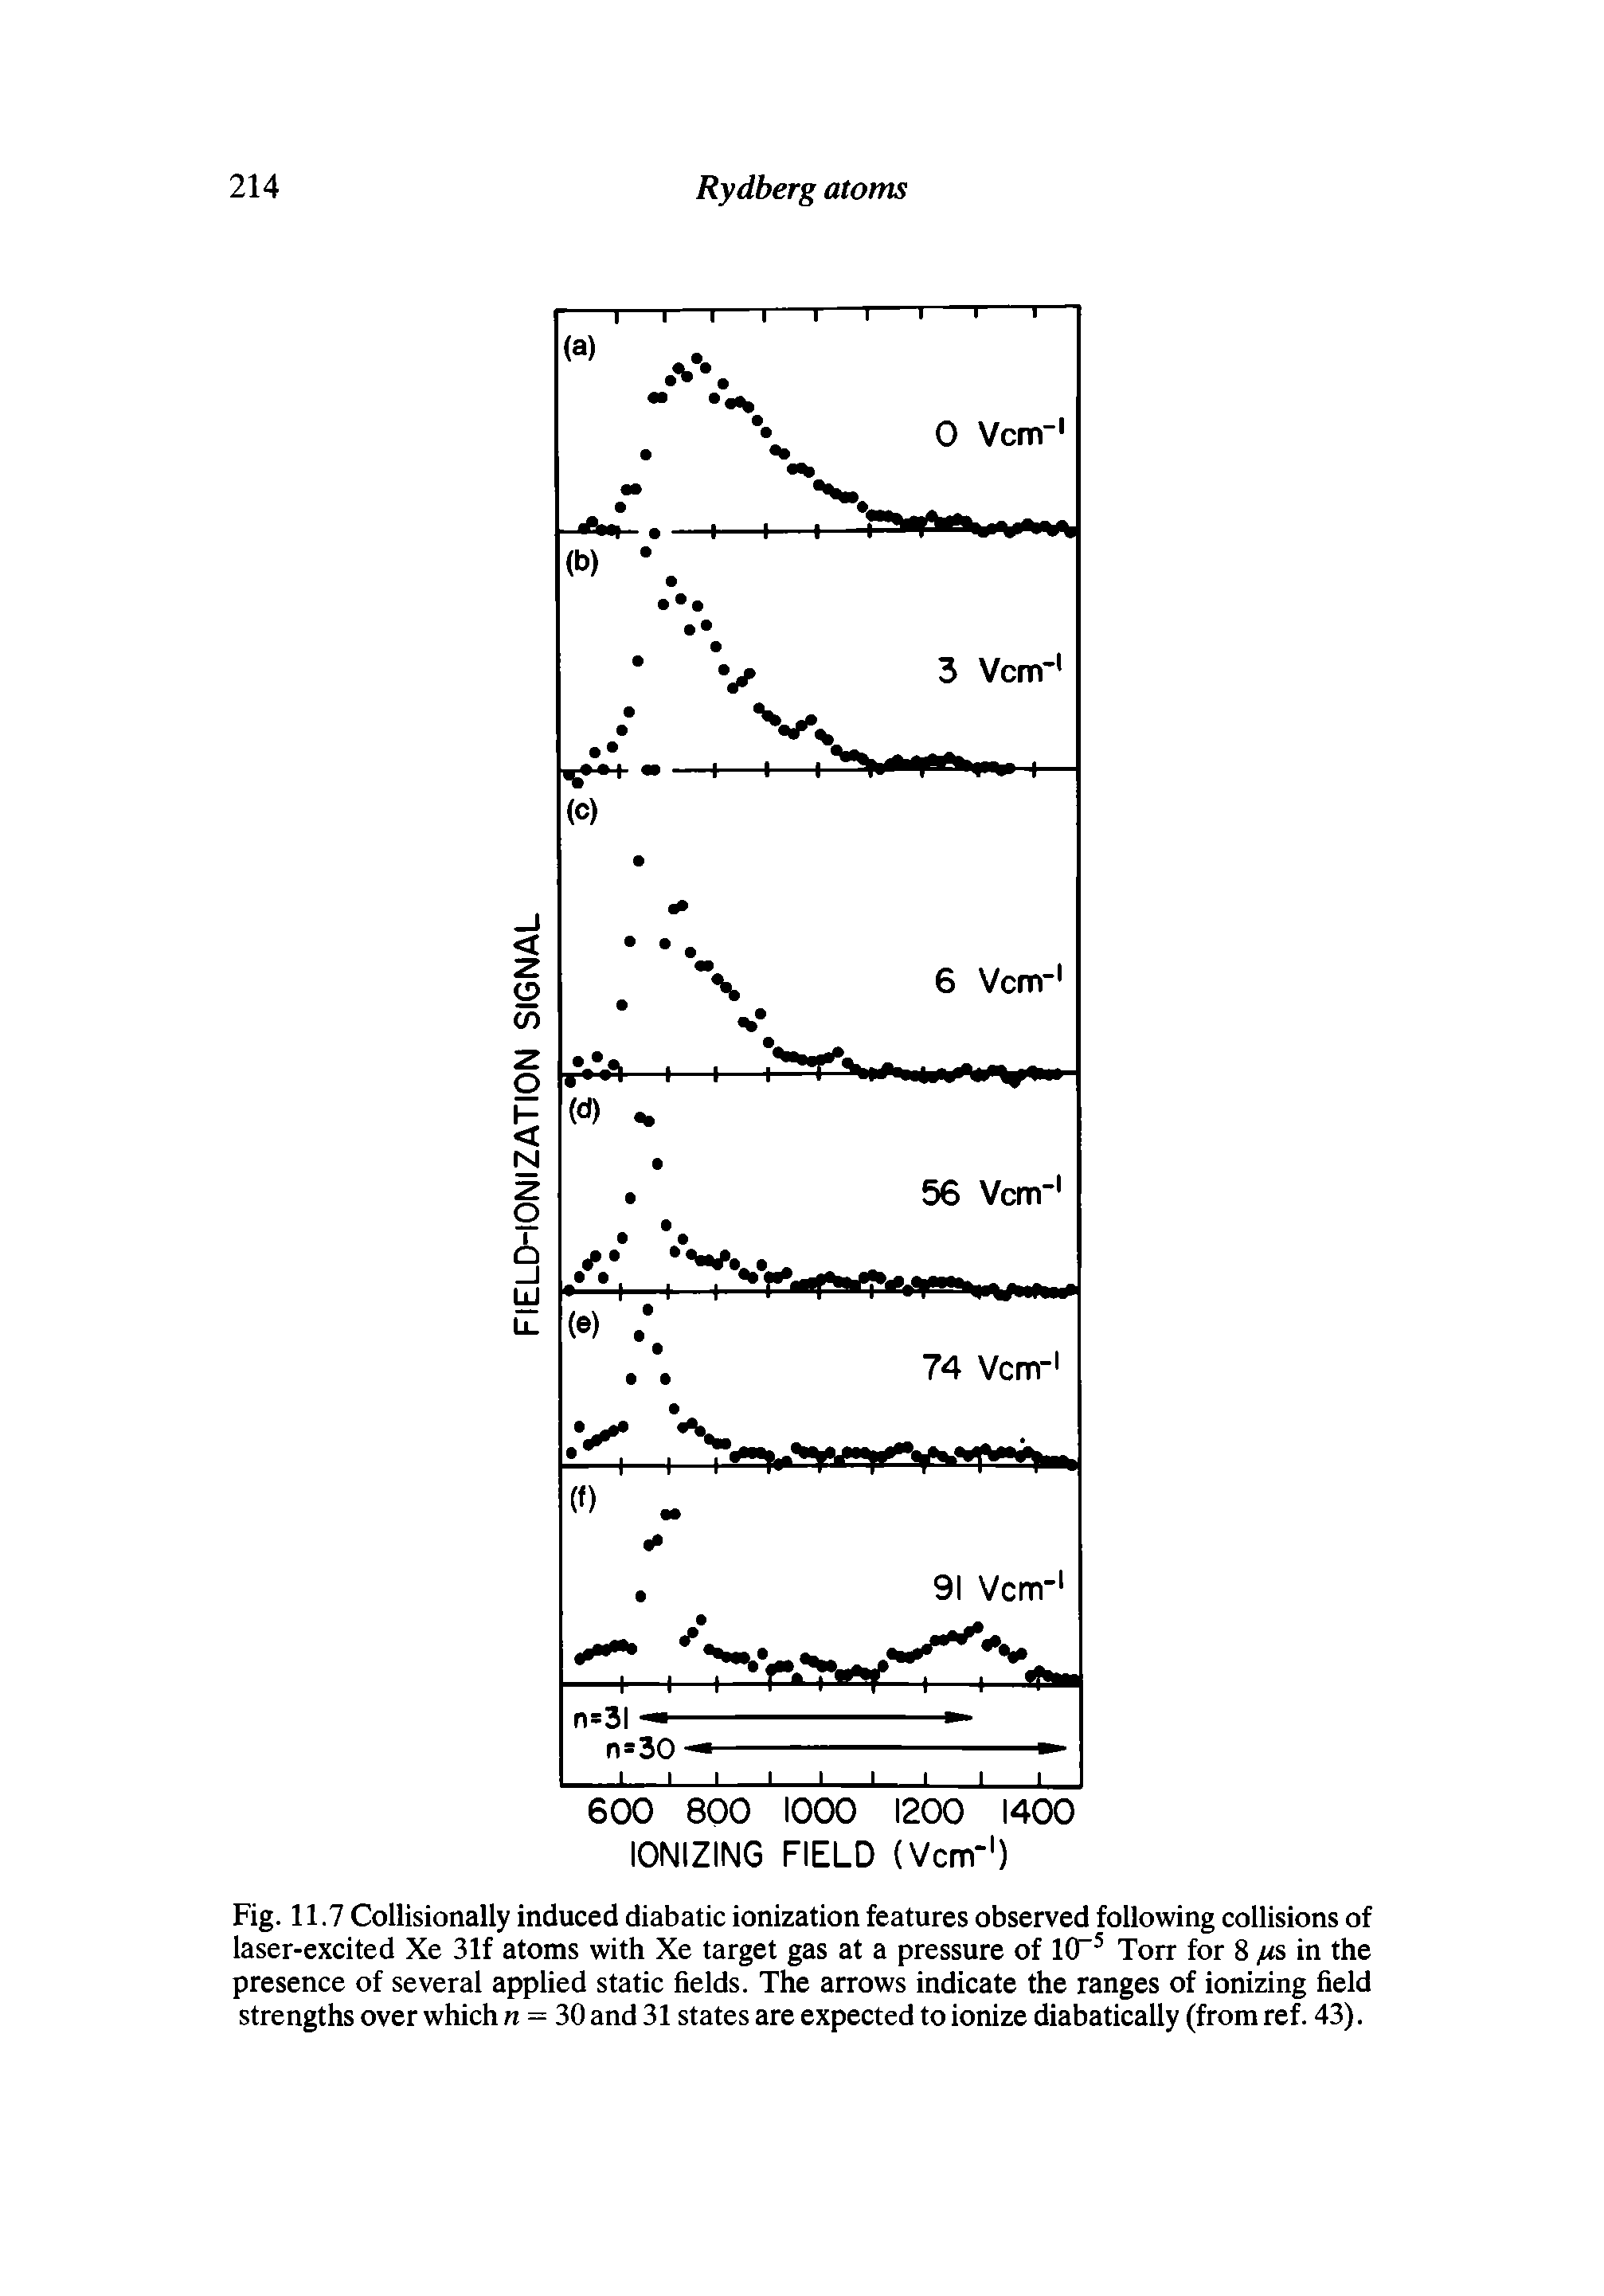 Fig. 11.7 Collisionally induced diabatic ionization features observed following collisions of laser-excited Xe 31f atoms with Xe target gas at a pressure of 1(T5 Torr for 8 fis in the presence of several applied static fields. The arrows indicate the ranges of ionizing field strengths over which n = 30 and 31 states are expected to ionize diabatically (from ref. 43).